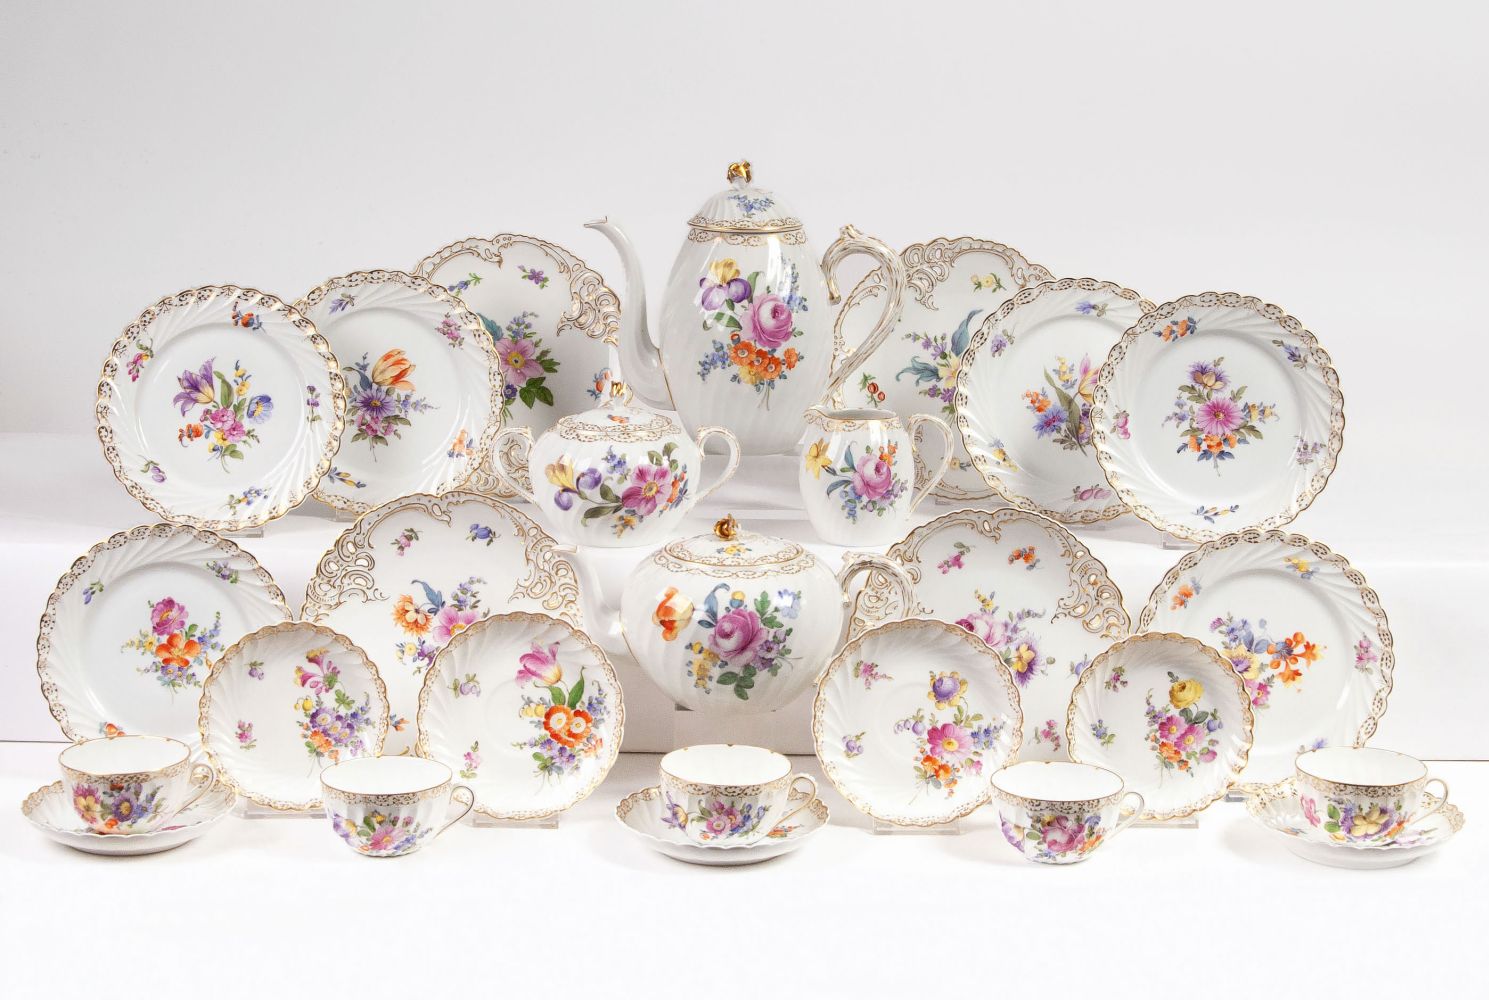 A Coffee and Tea Service with Floral Painting